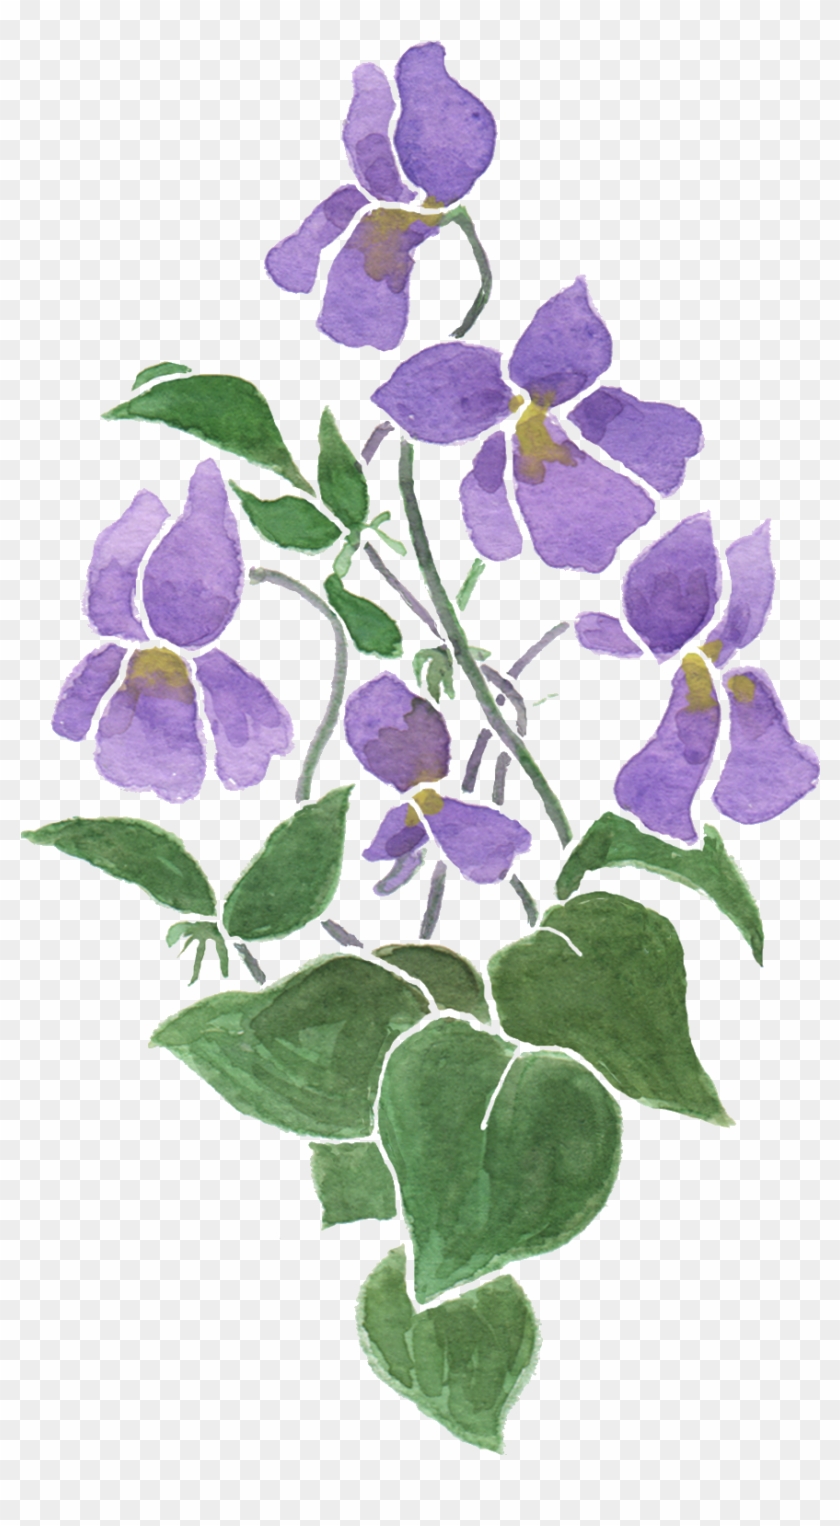 It Doesn't Deny That Violets Are Not Particularly Showy - It Doesn't Deny That Violets Are Not Particularly Showy #313241